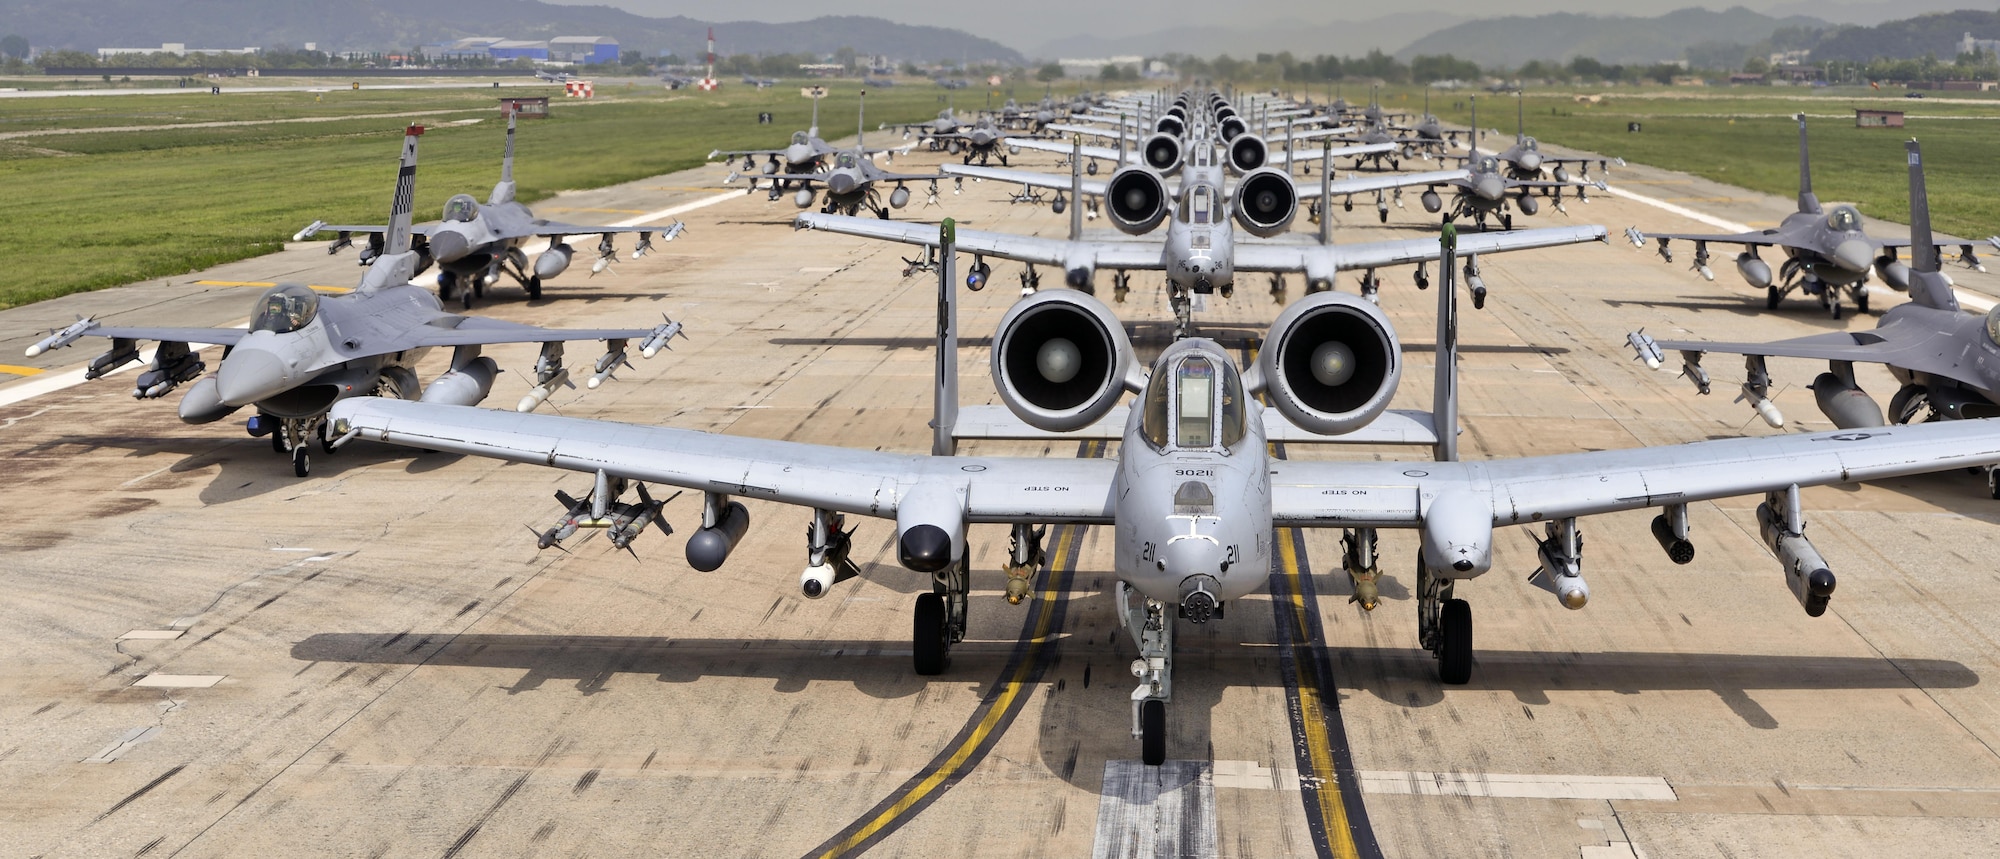 A-10 Thunderbolt II and F-16 Fighting Falcon fighter aircraft perform an 'Elephant Walk' on the runway this week during Exercise Beverly Herd 16-01 at Osan Air Base, Republic of Korea.  The Elephant Walk was a demonstration of U.S. Air Force capabilities and strength and showcases the wing's ability to generate combat airpower in an expedient manner in order to respond to simulated contingency operations. The A-10 Thunderbolt II aircraft are the 25th Fighter Squadron "Draggins" and the F-16 Fighting Falcon aircraft are the 36th Fighter Squadron "Friends" from the 51st Fighter Wing, Osan AB, ROK; the additional F-16 aircraft are the 179th Fighter Squadron "Bulldogs" from the 148th Fighter Wing out of Duluth Air National Guard Base, Minnesota. (U.S. Air Force photo by Tech. Sgt. Travis Edwards/Released) 